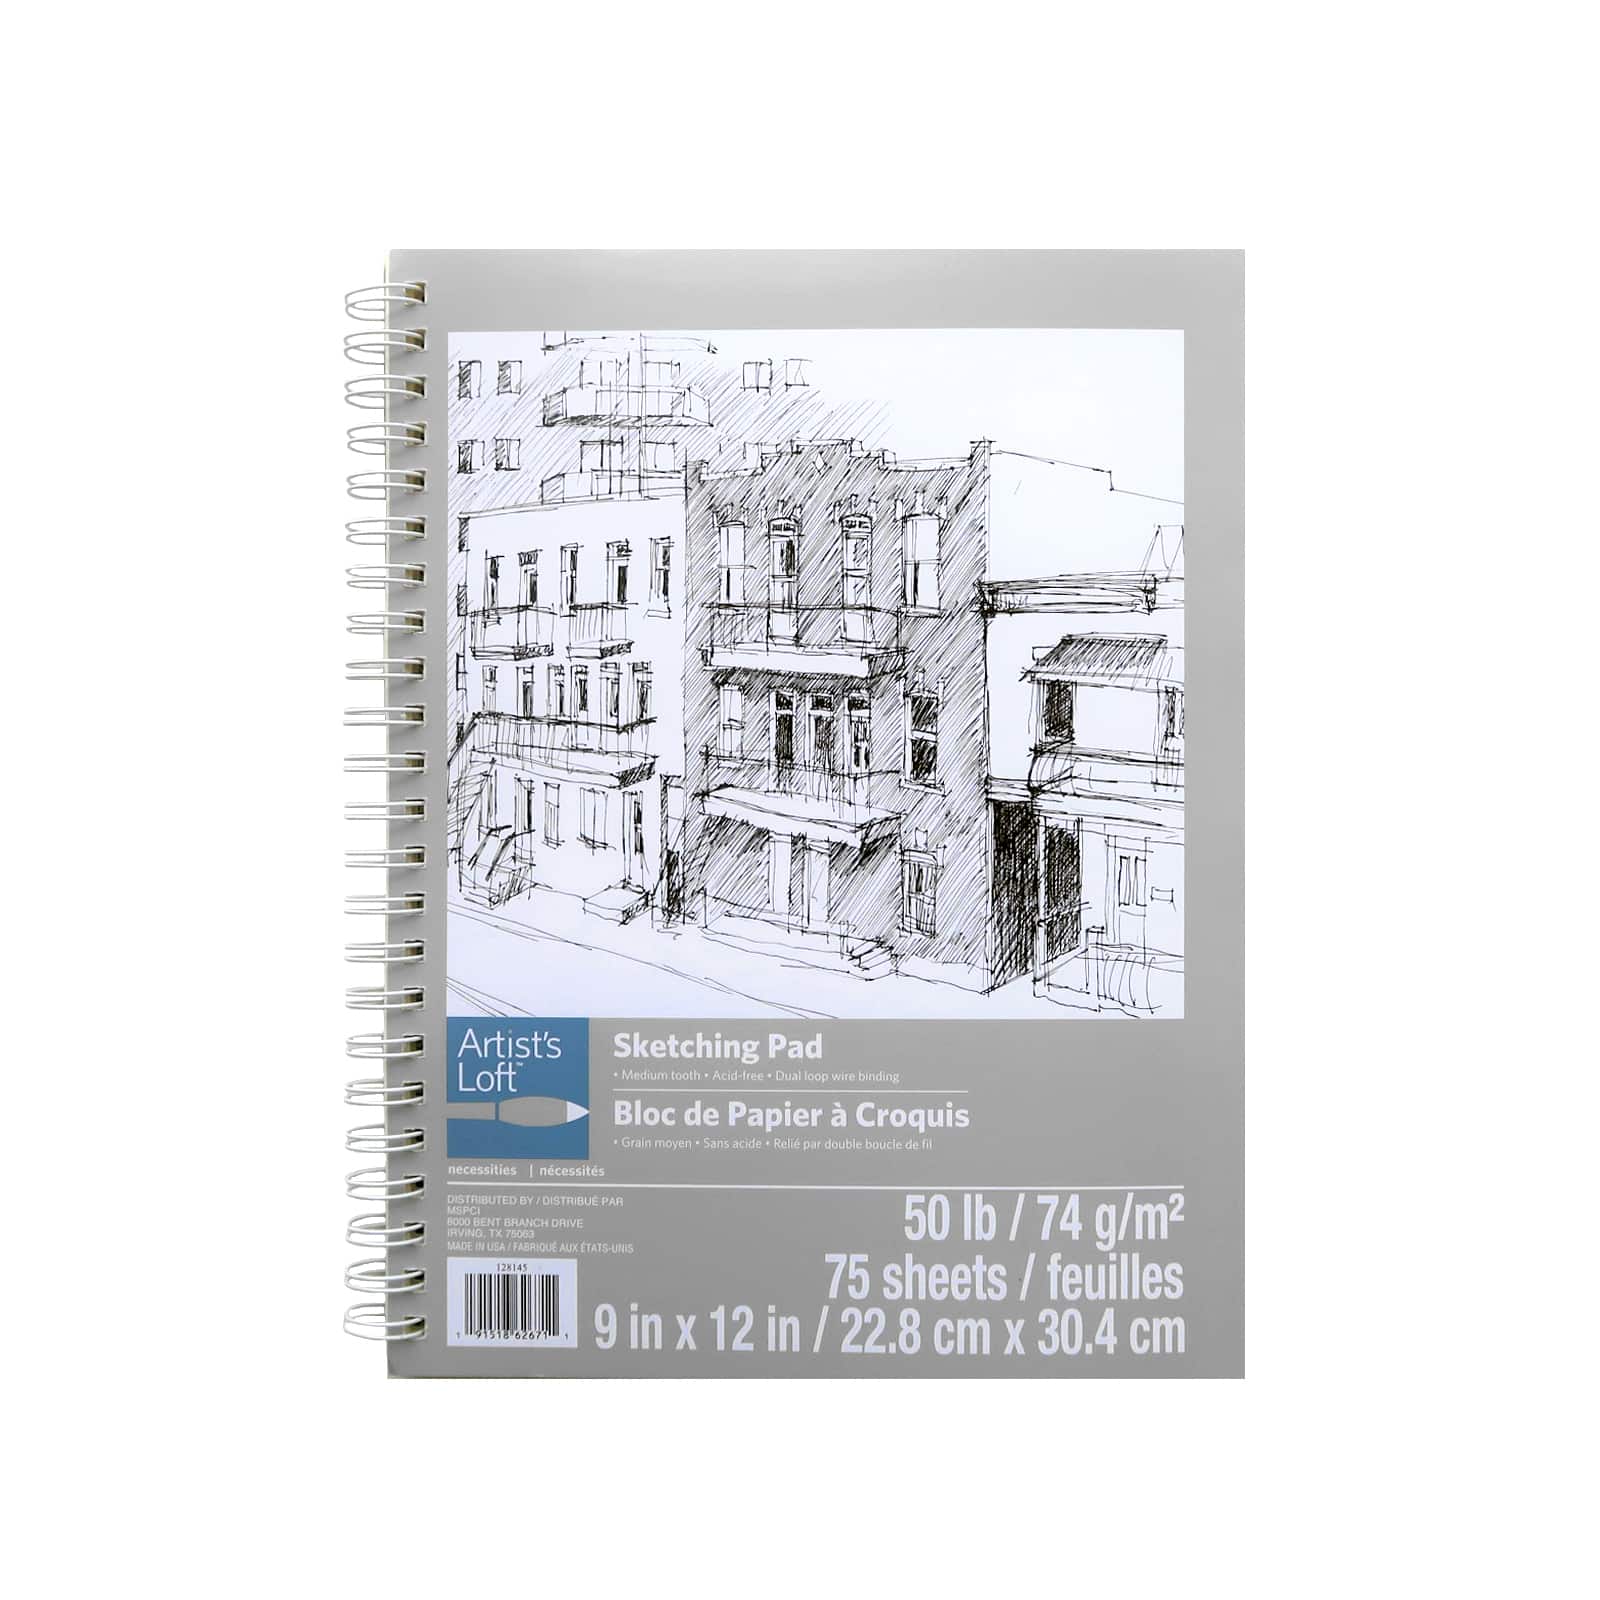 15 Pack: Recycled Sketch Paper Pad by Artist's Loft, 9 inch x 12 inch, Size: 10 x 0.88 x 12, White